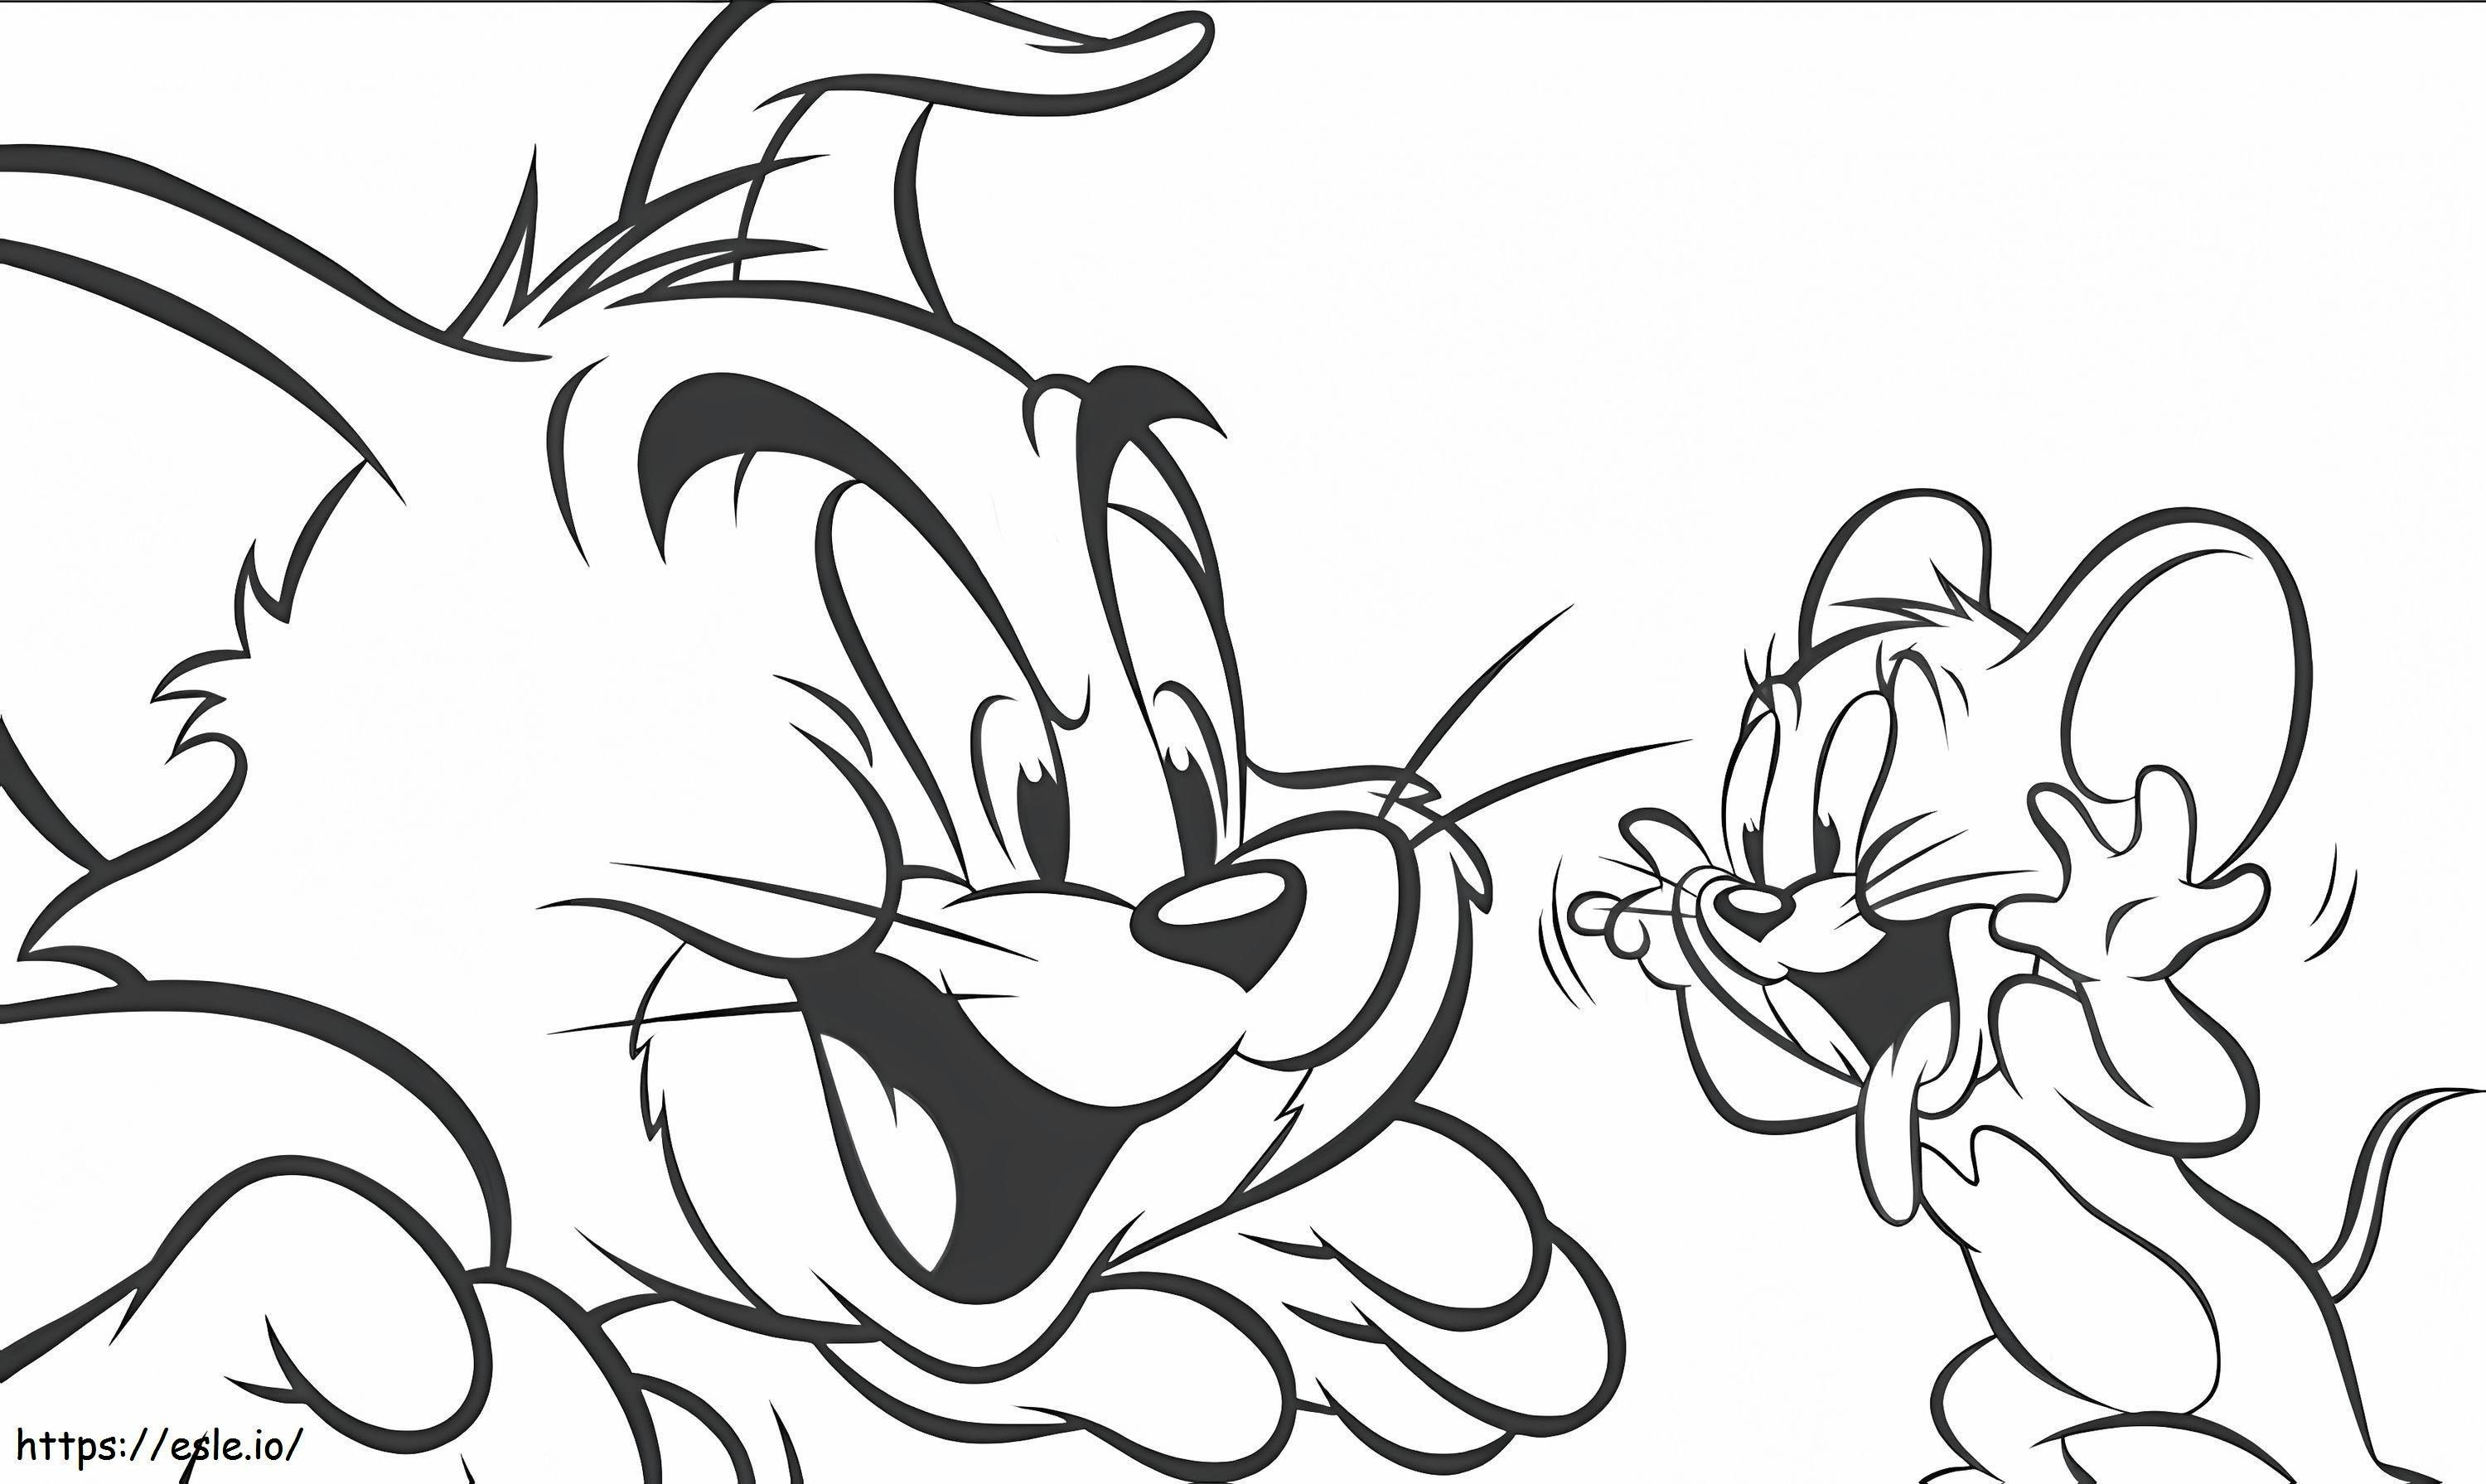 1532423011 Tom And Jerry A4 coloring page